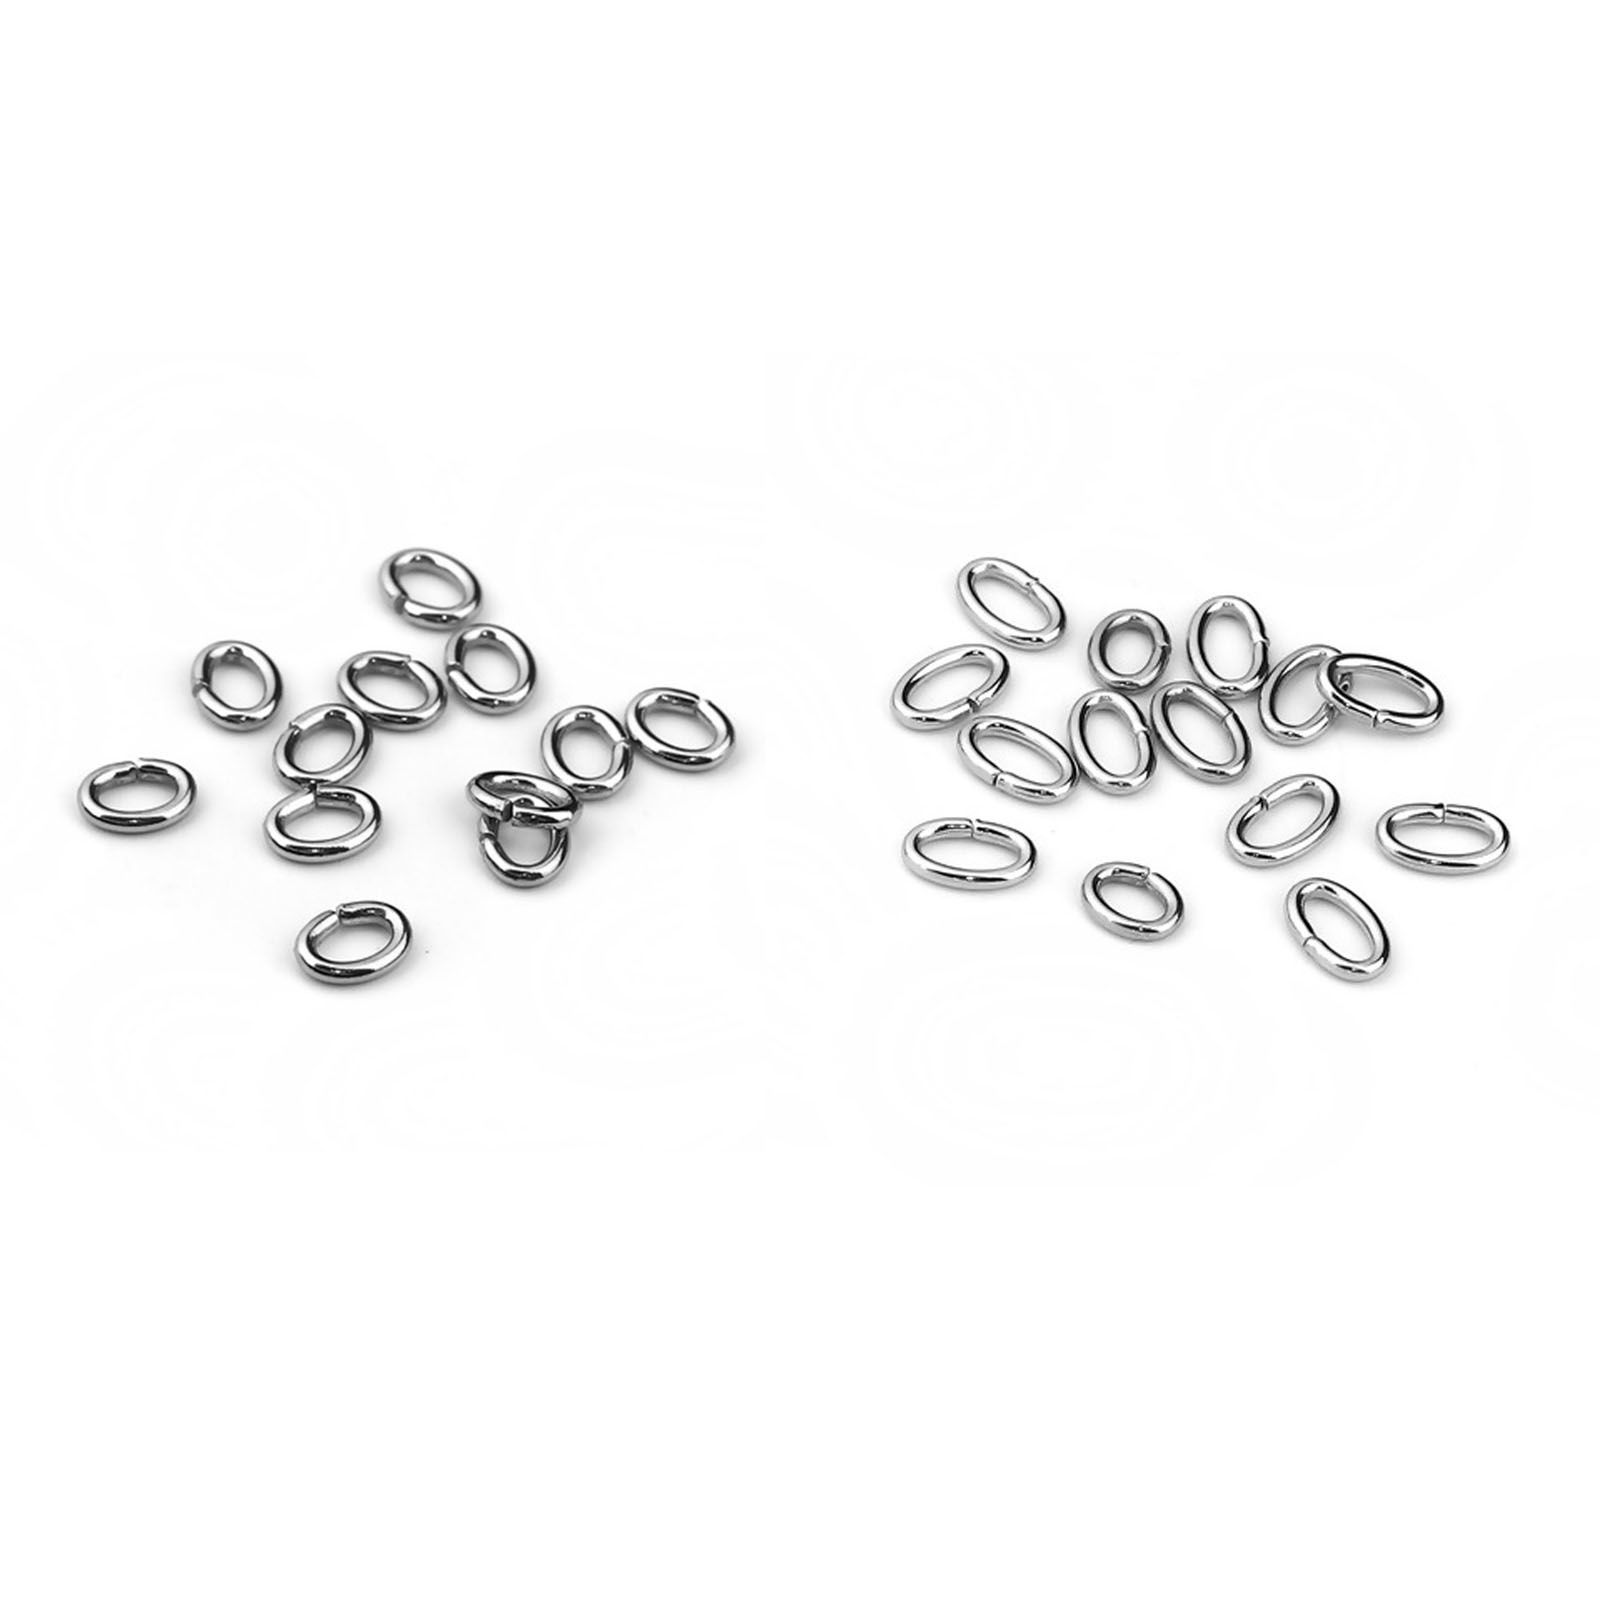 Picture of Stainless Steel Opened Jump Rings Findings Oval Silver Tone 8mm( 3/8") x 5mm( 2/8"), 200 PCs